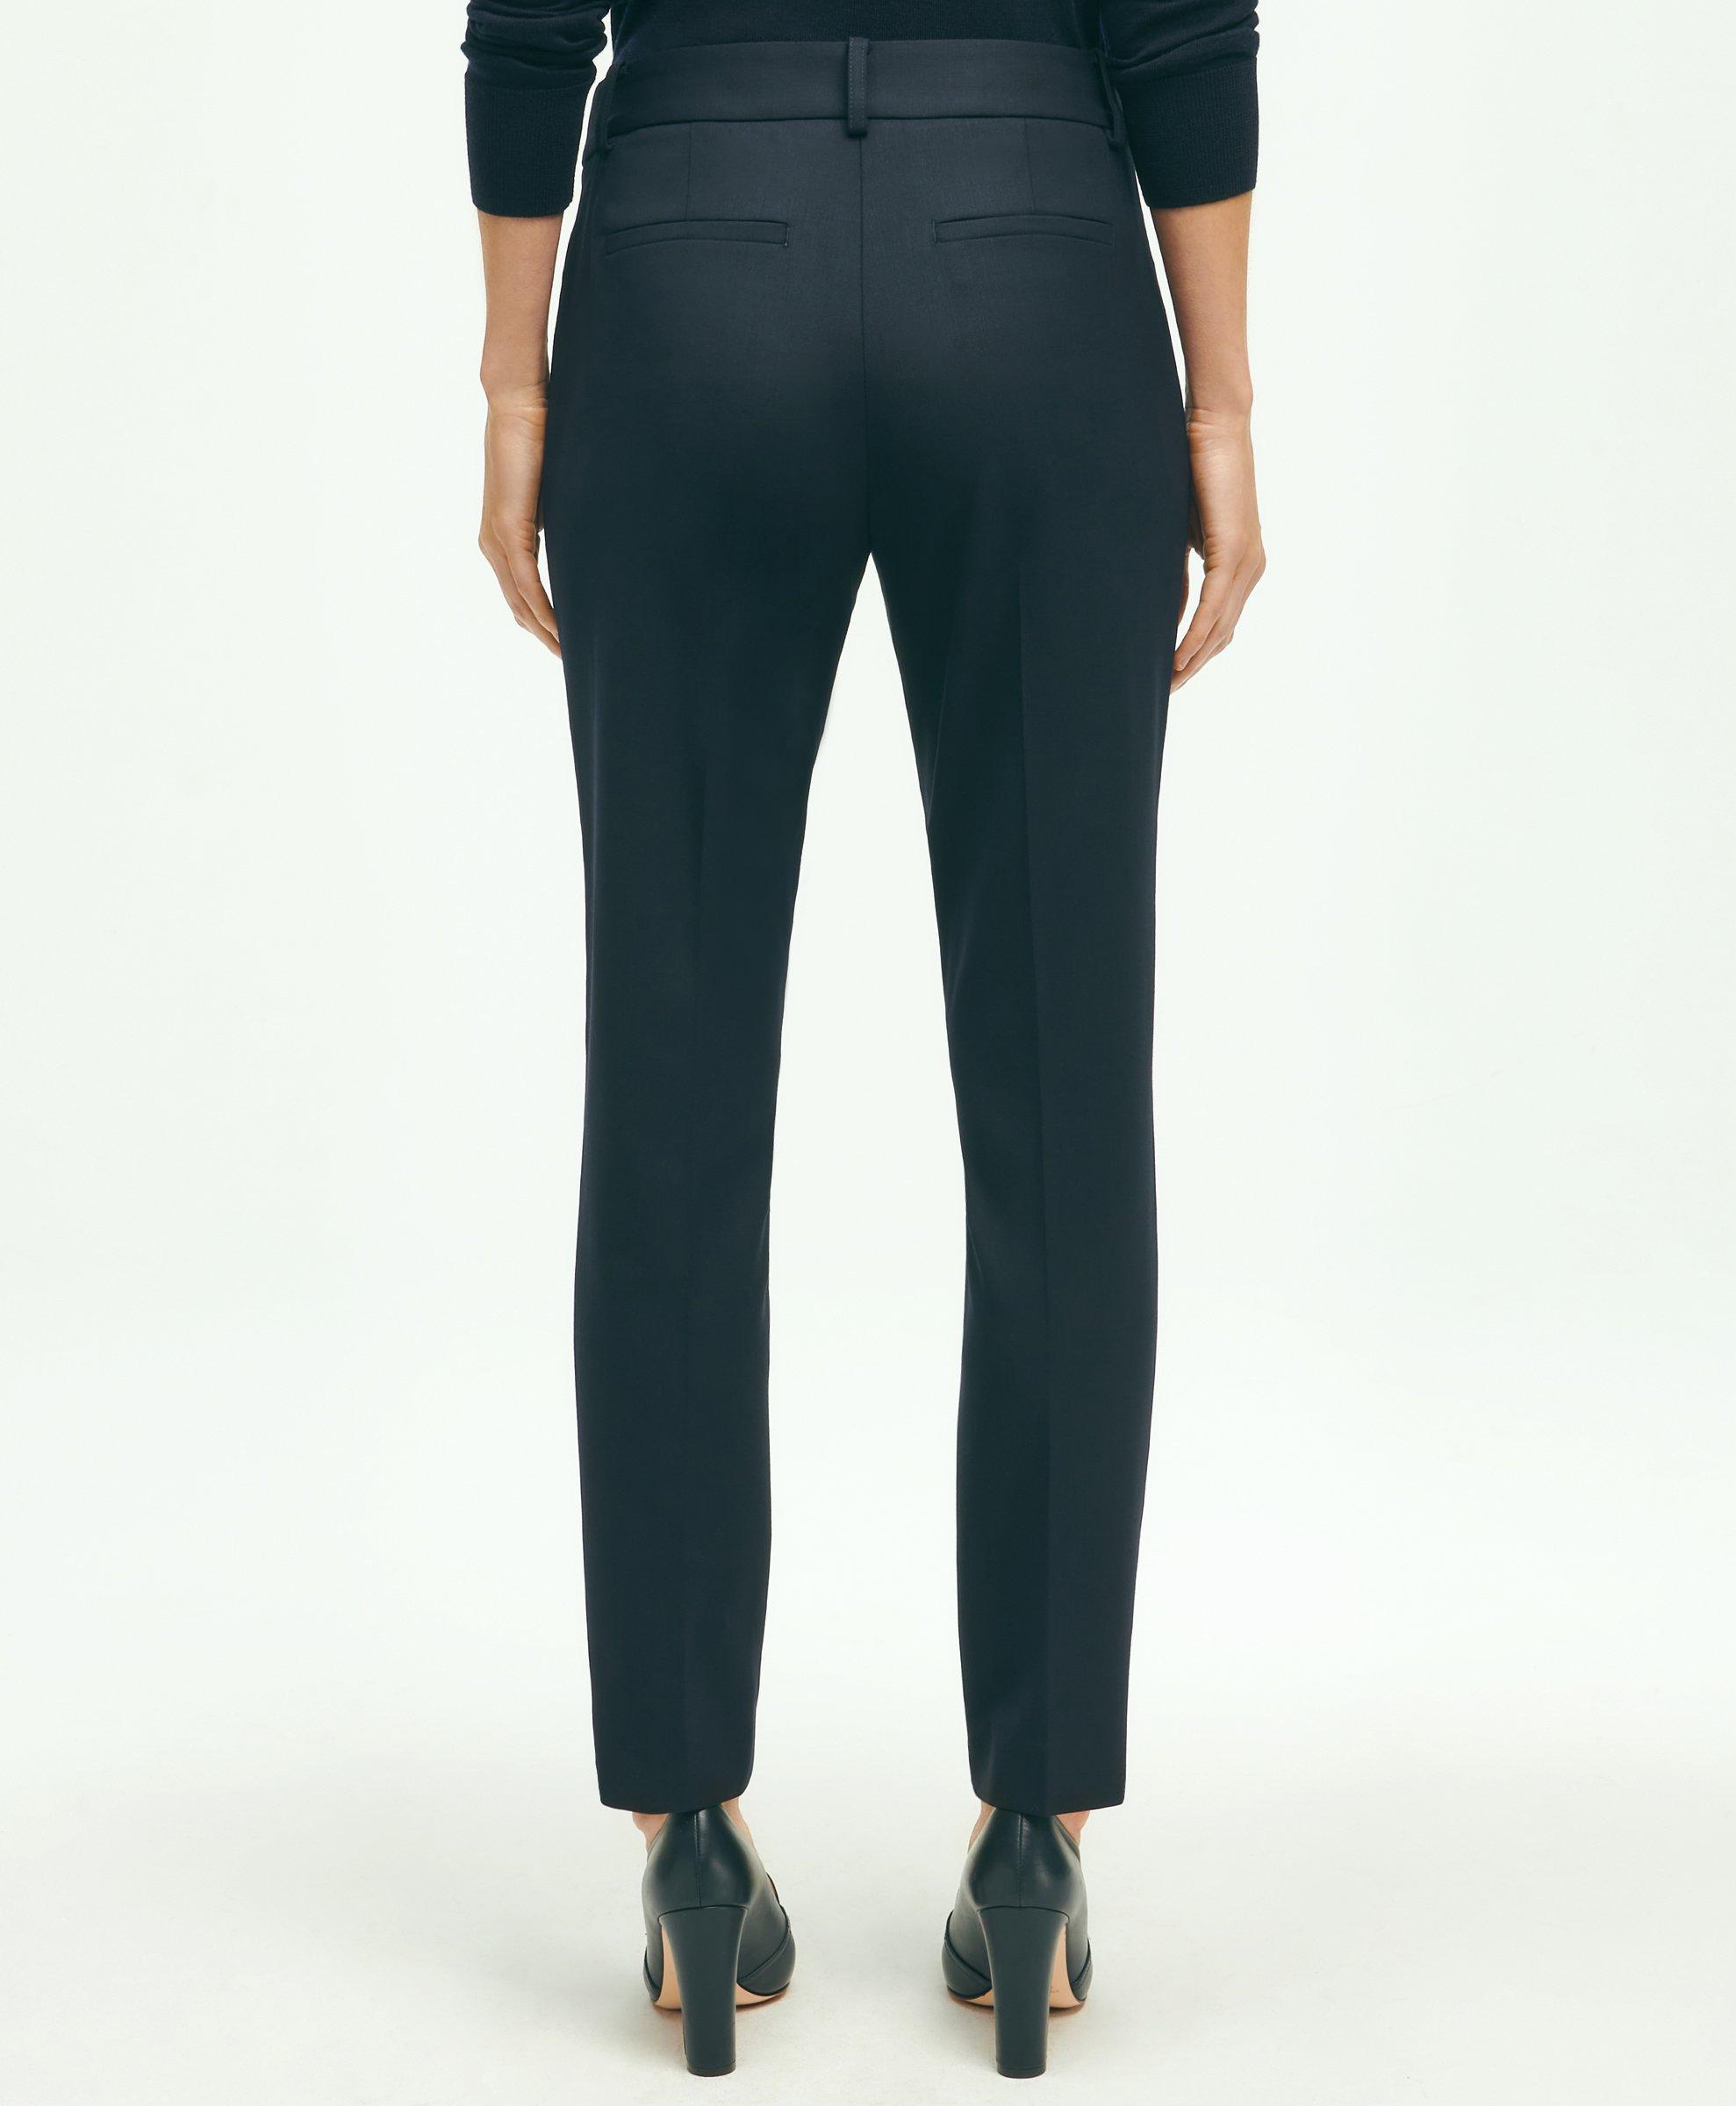 Stretch Wool Cropped Pants, image 2